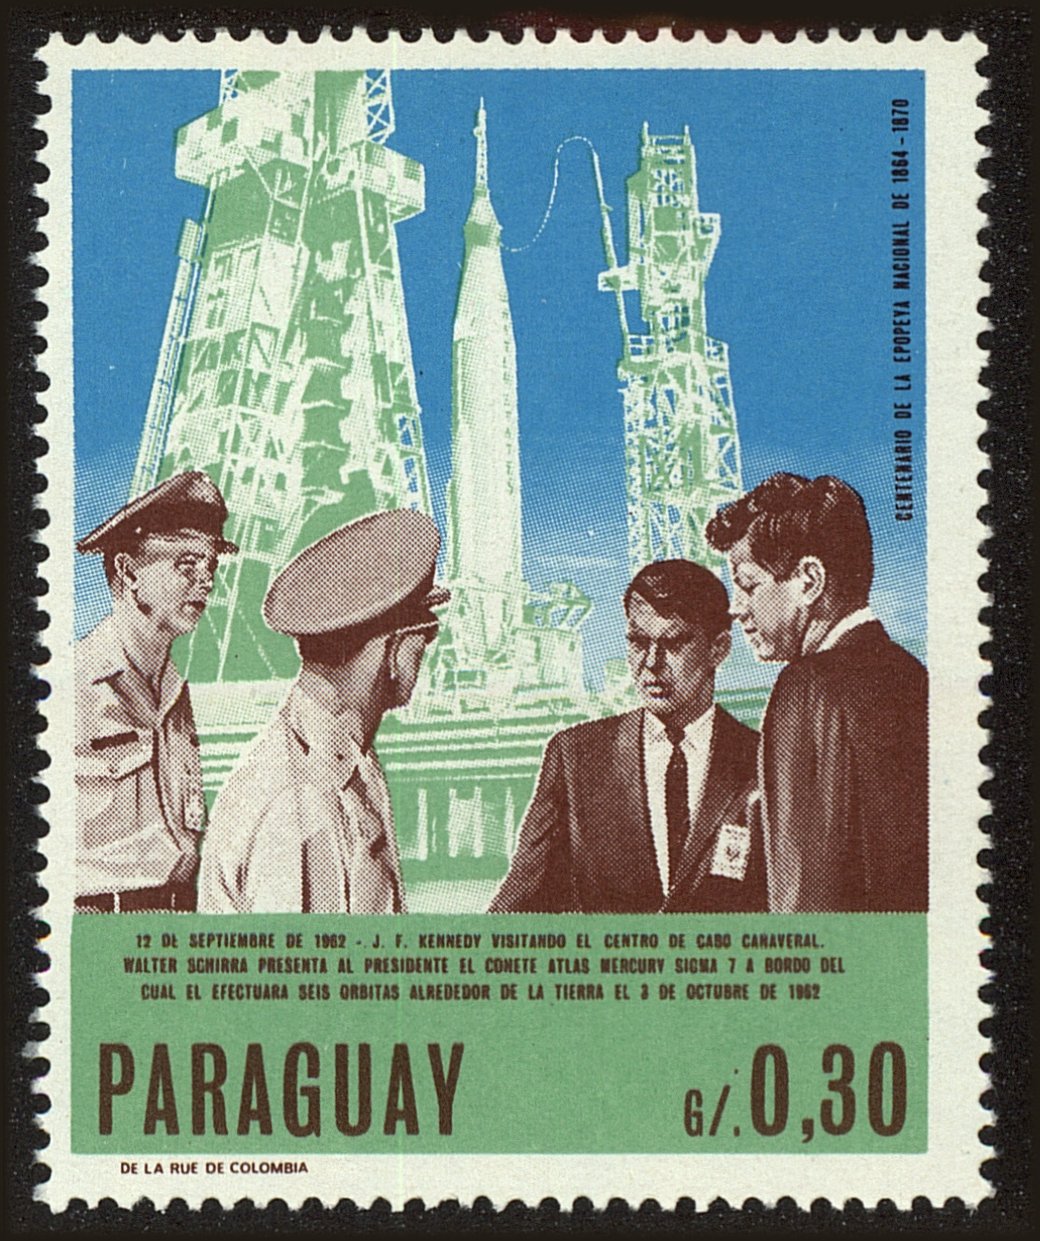 Front view of Paraguay 1045 collectors stamp